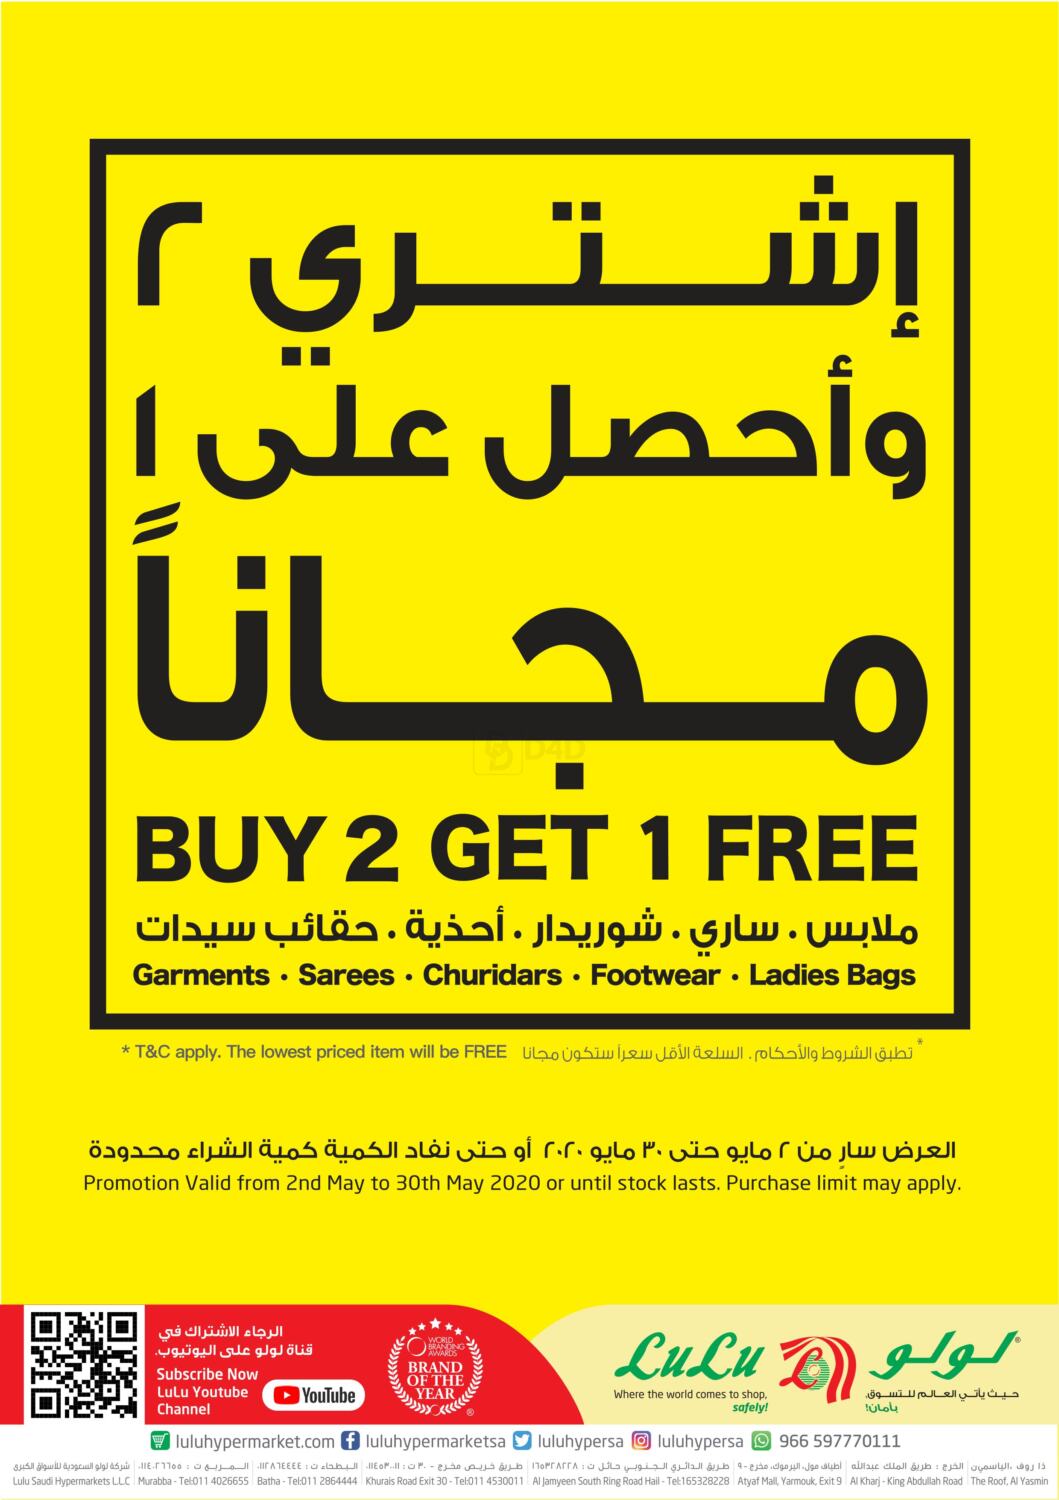 Buy 2 Get 1 Free' promotion at LuLu - Gulf Times